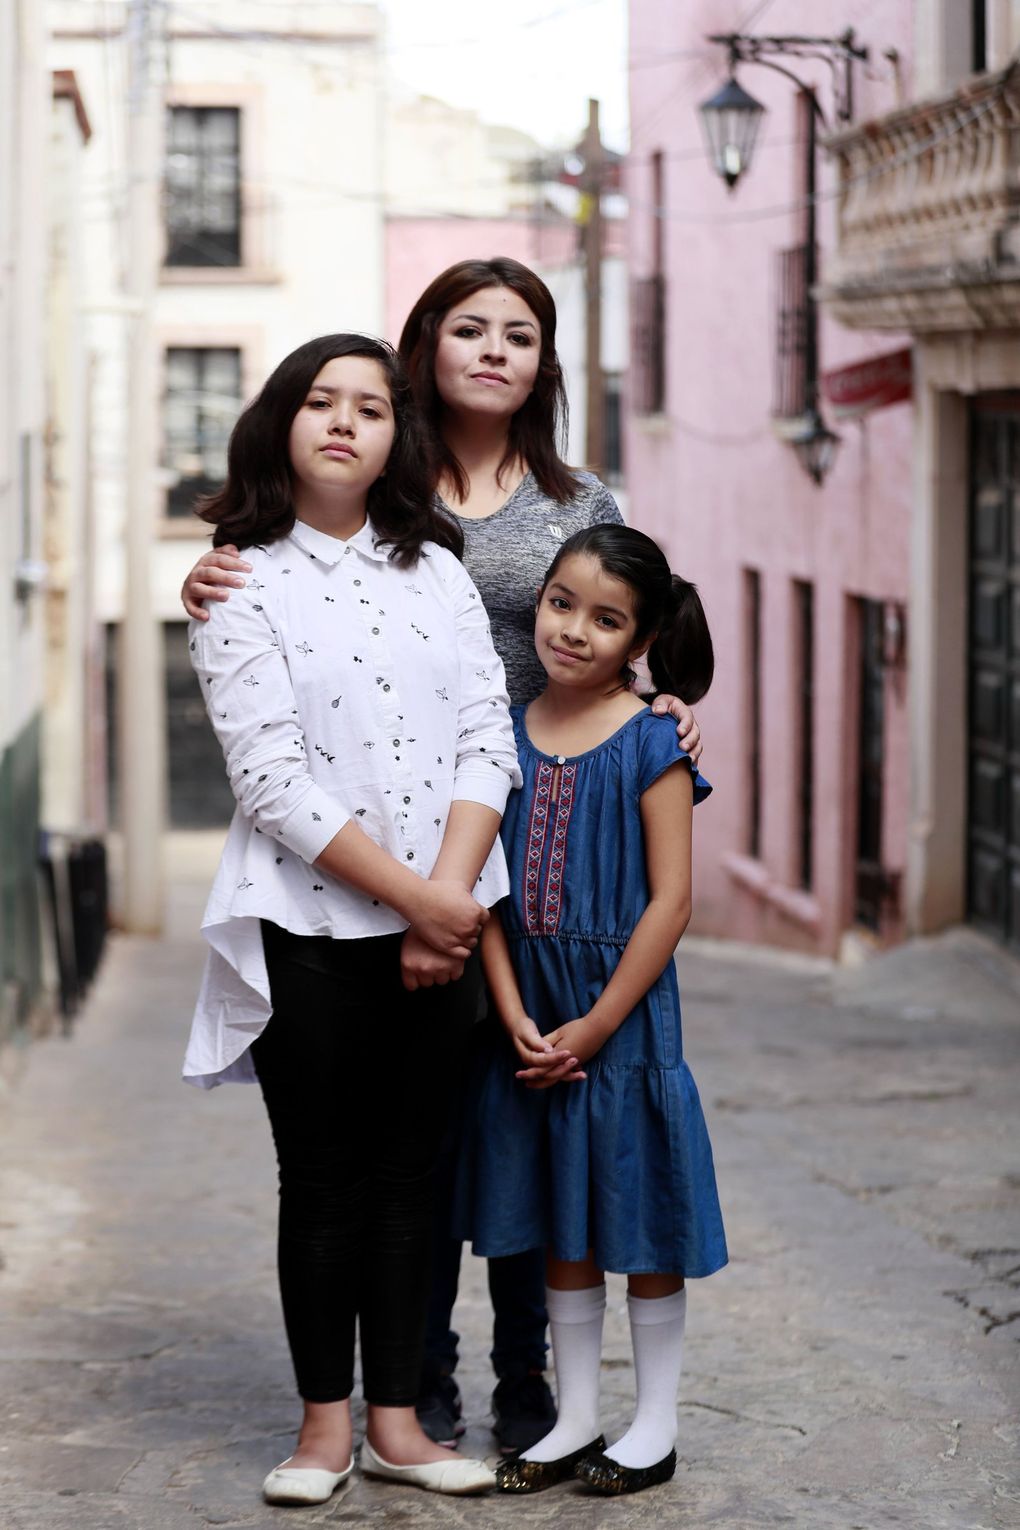 Evelyn Leyva Gómez says she found no help for her daughters Tori, 11, and Ellie, 9, as they tried to keep up in school after moving from the U.S. (Erika Schultz / The Seattle Times)